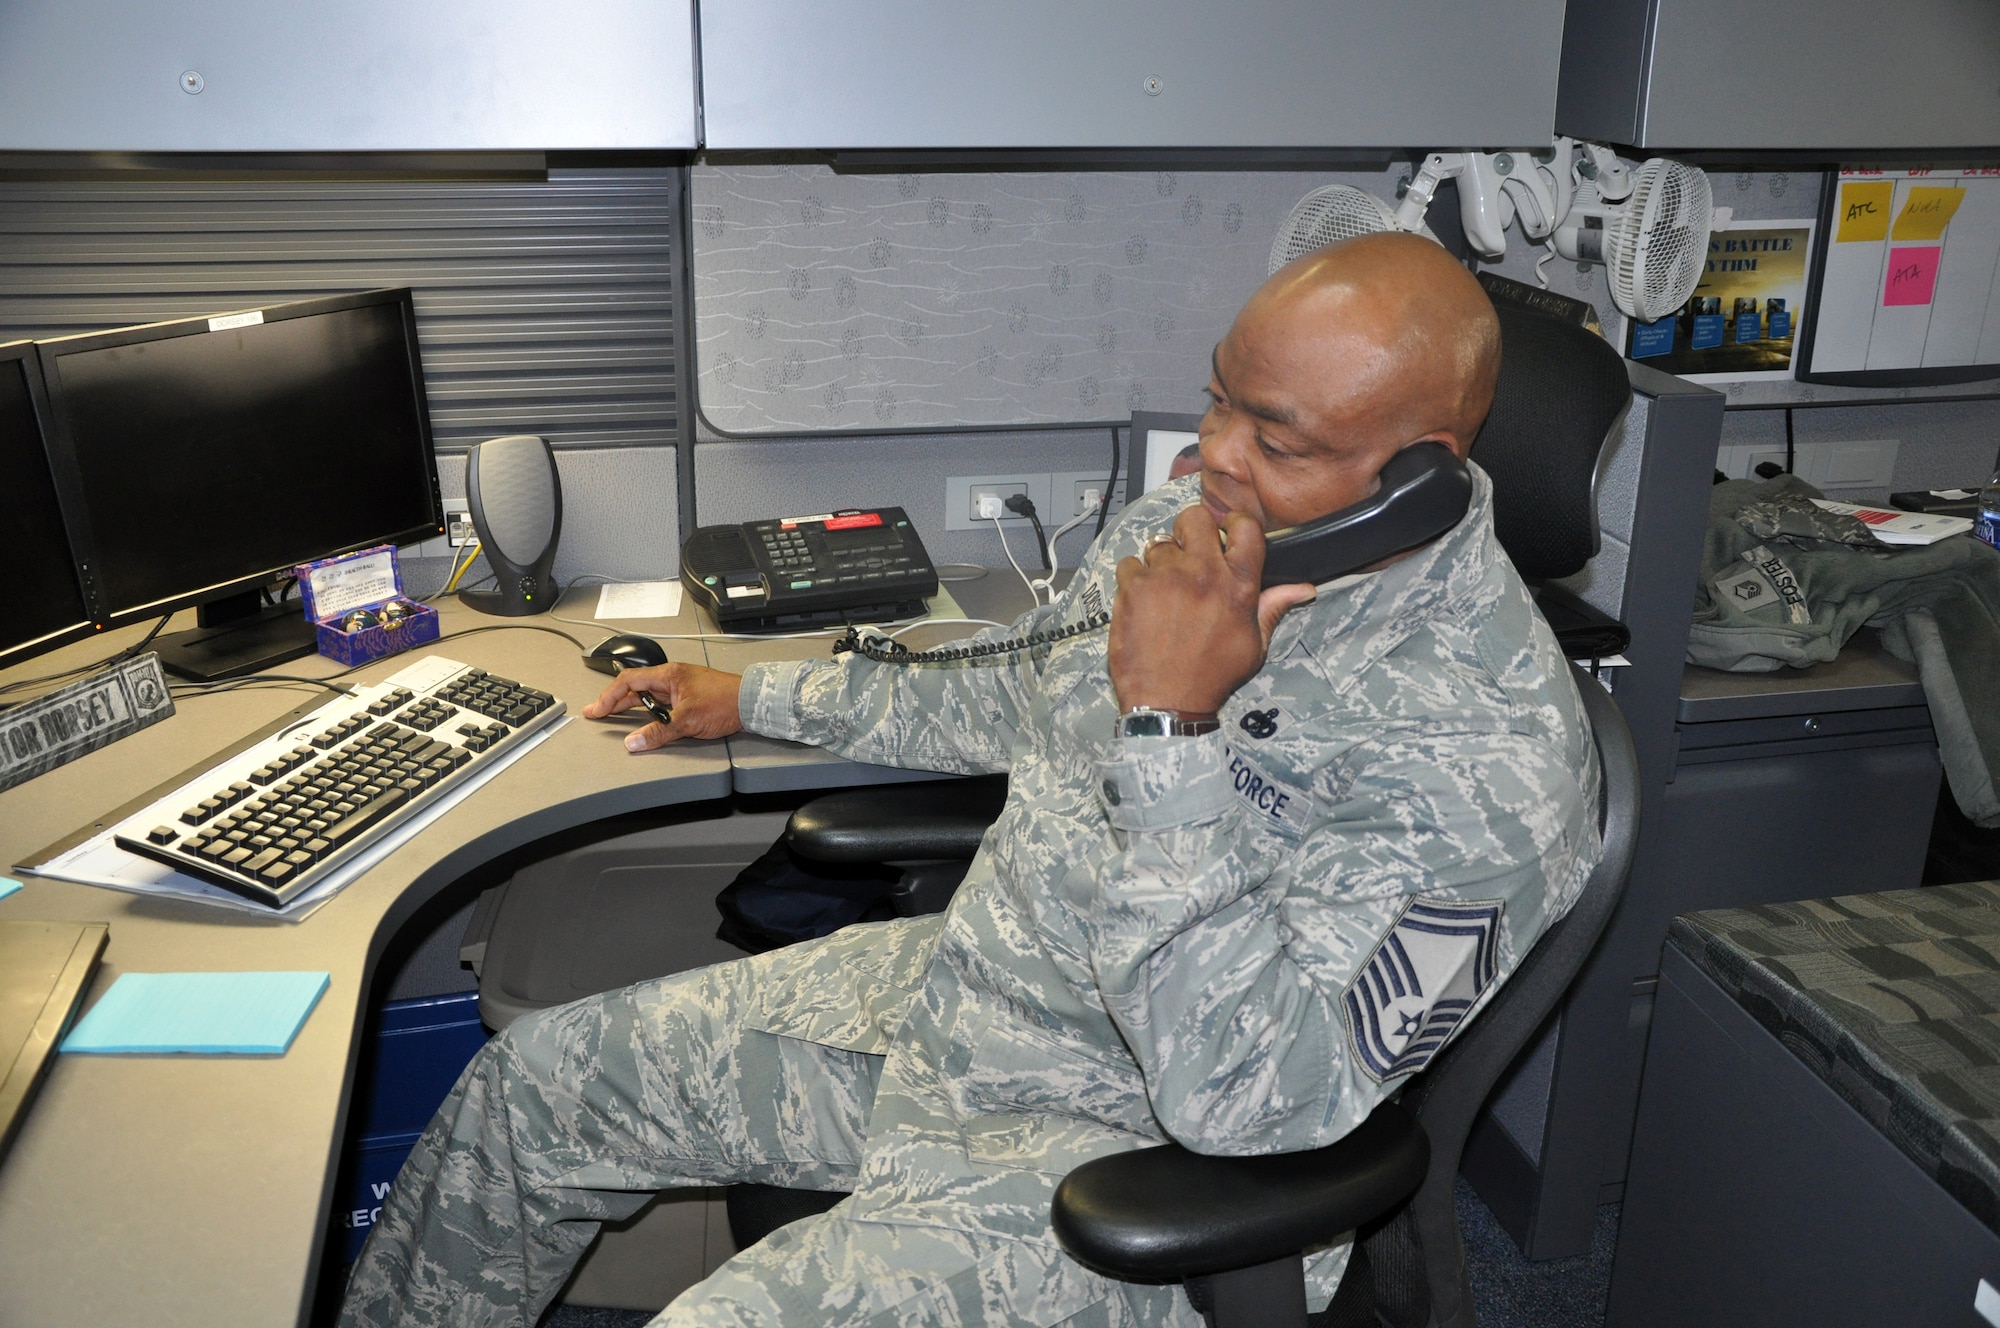 Senior Master Sgt. Victor Dorsey works in his office at Headquarters Air Mobility Command at Scott Air Force Base, Ill., on Oct. 21, 2011. Dorsey and his family have been active participants in supporting the Make A Wish Foundation for more than 10 years. (U.S. Air Force Photo/Master Sgt. Sabrina D. Foster)